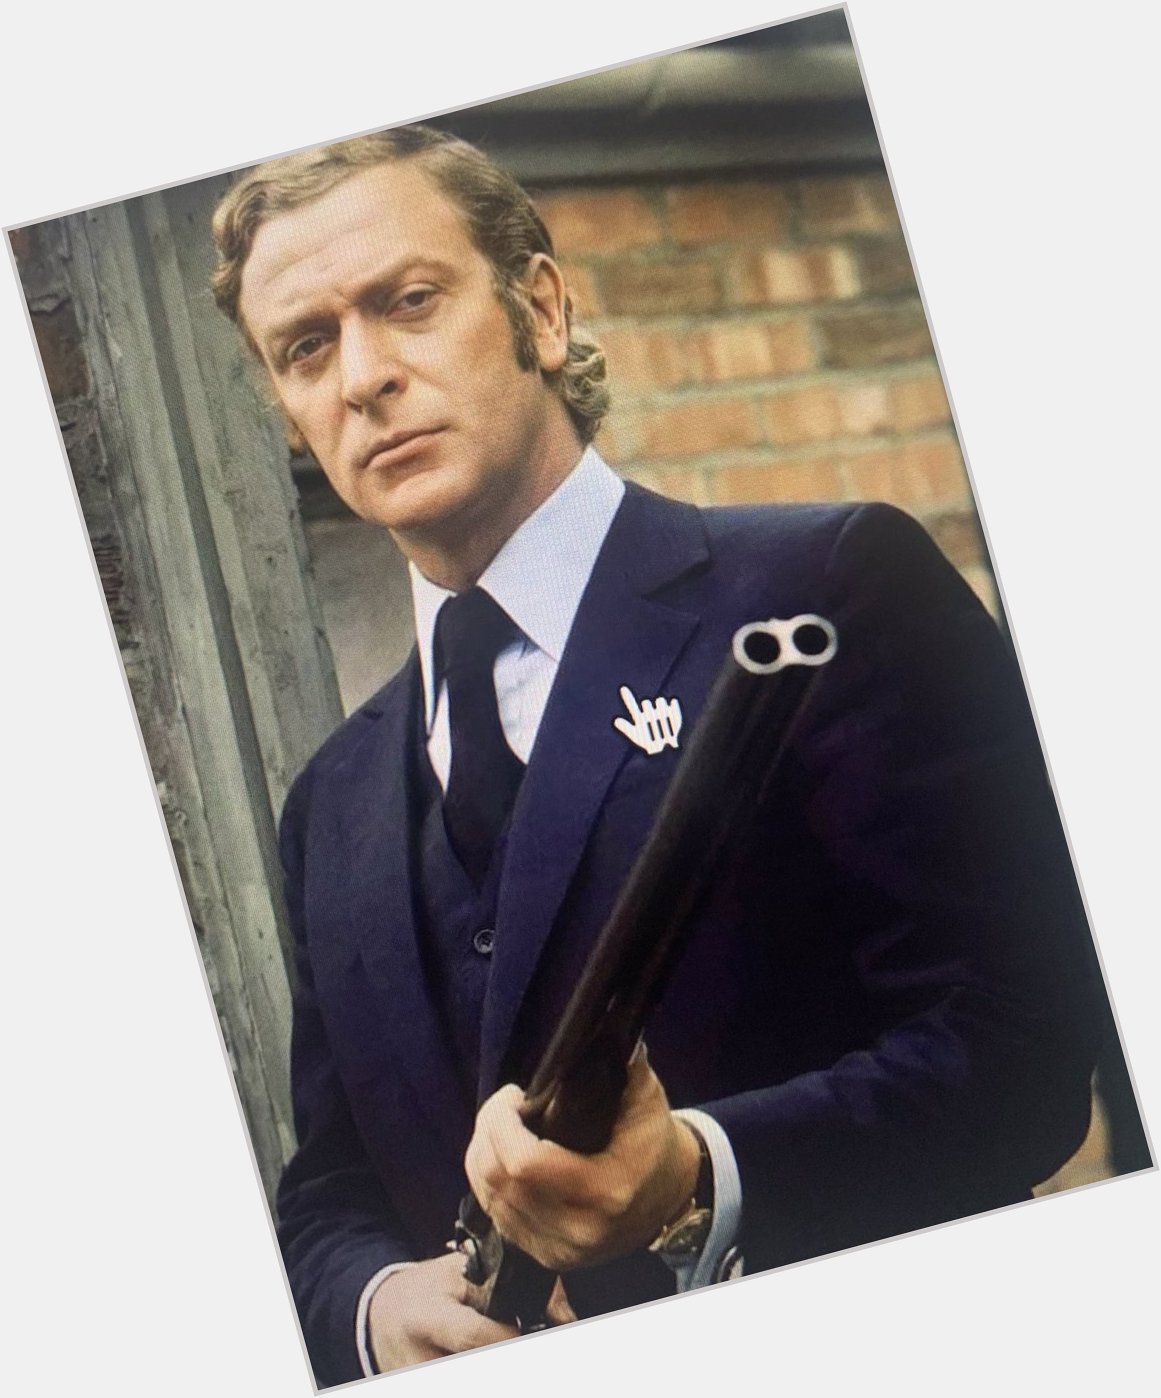 Happy BDay to the great Michael Caine! 